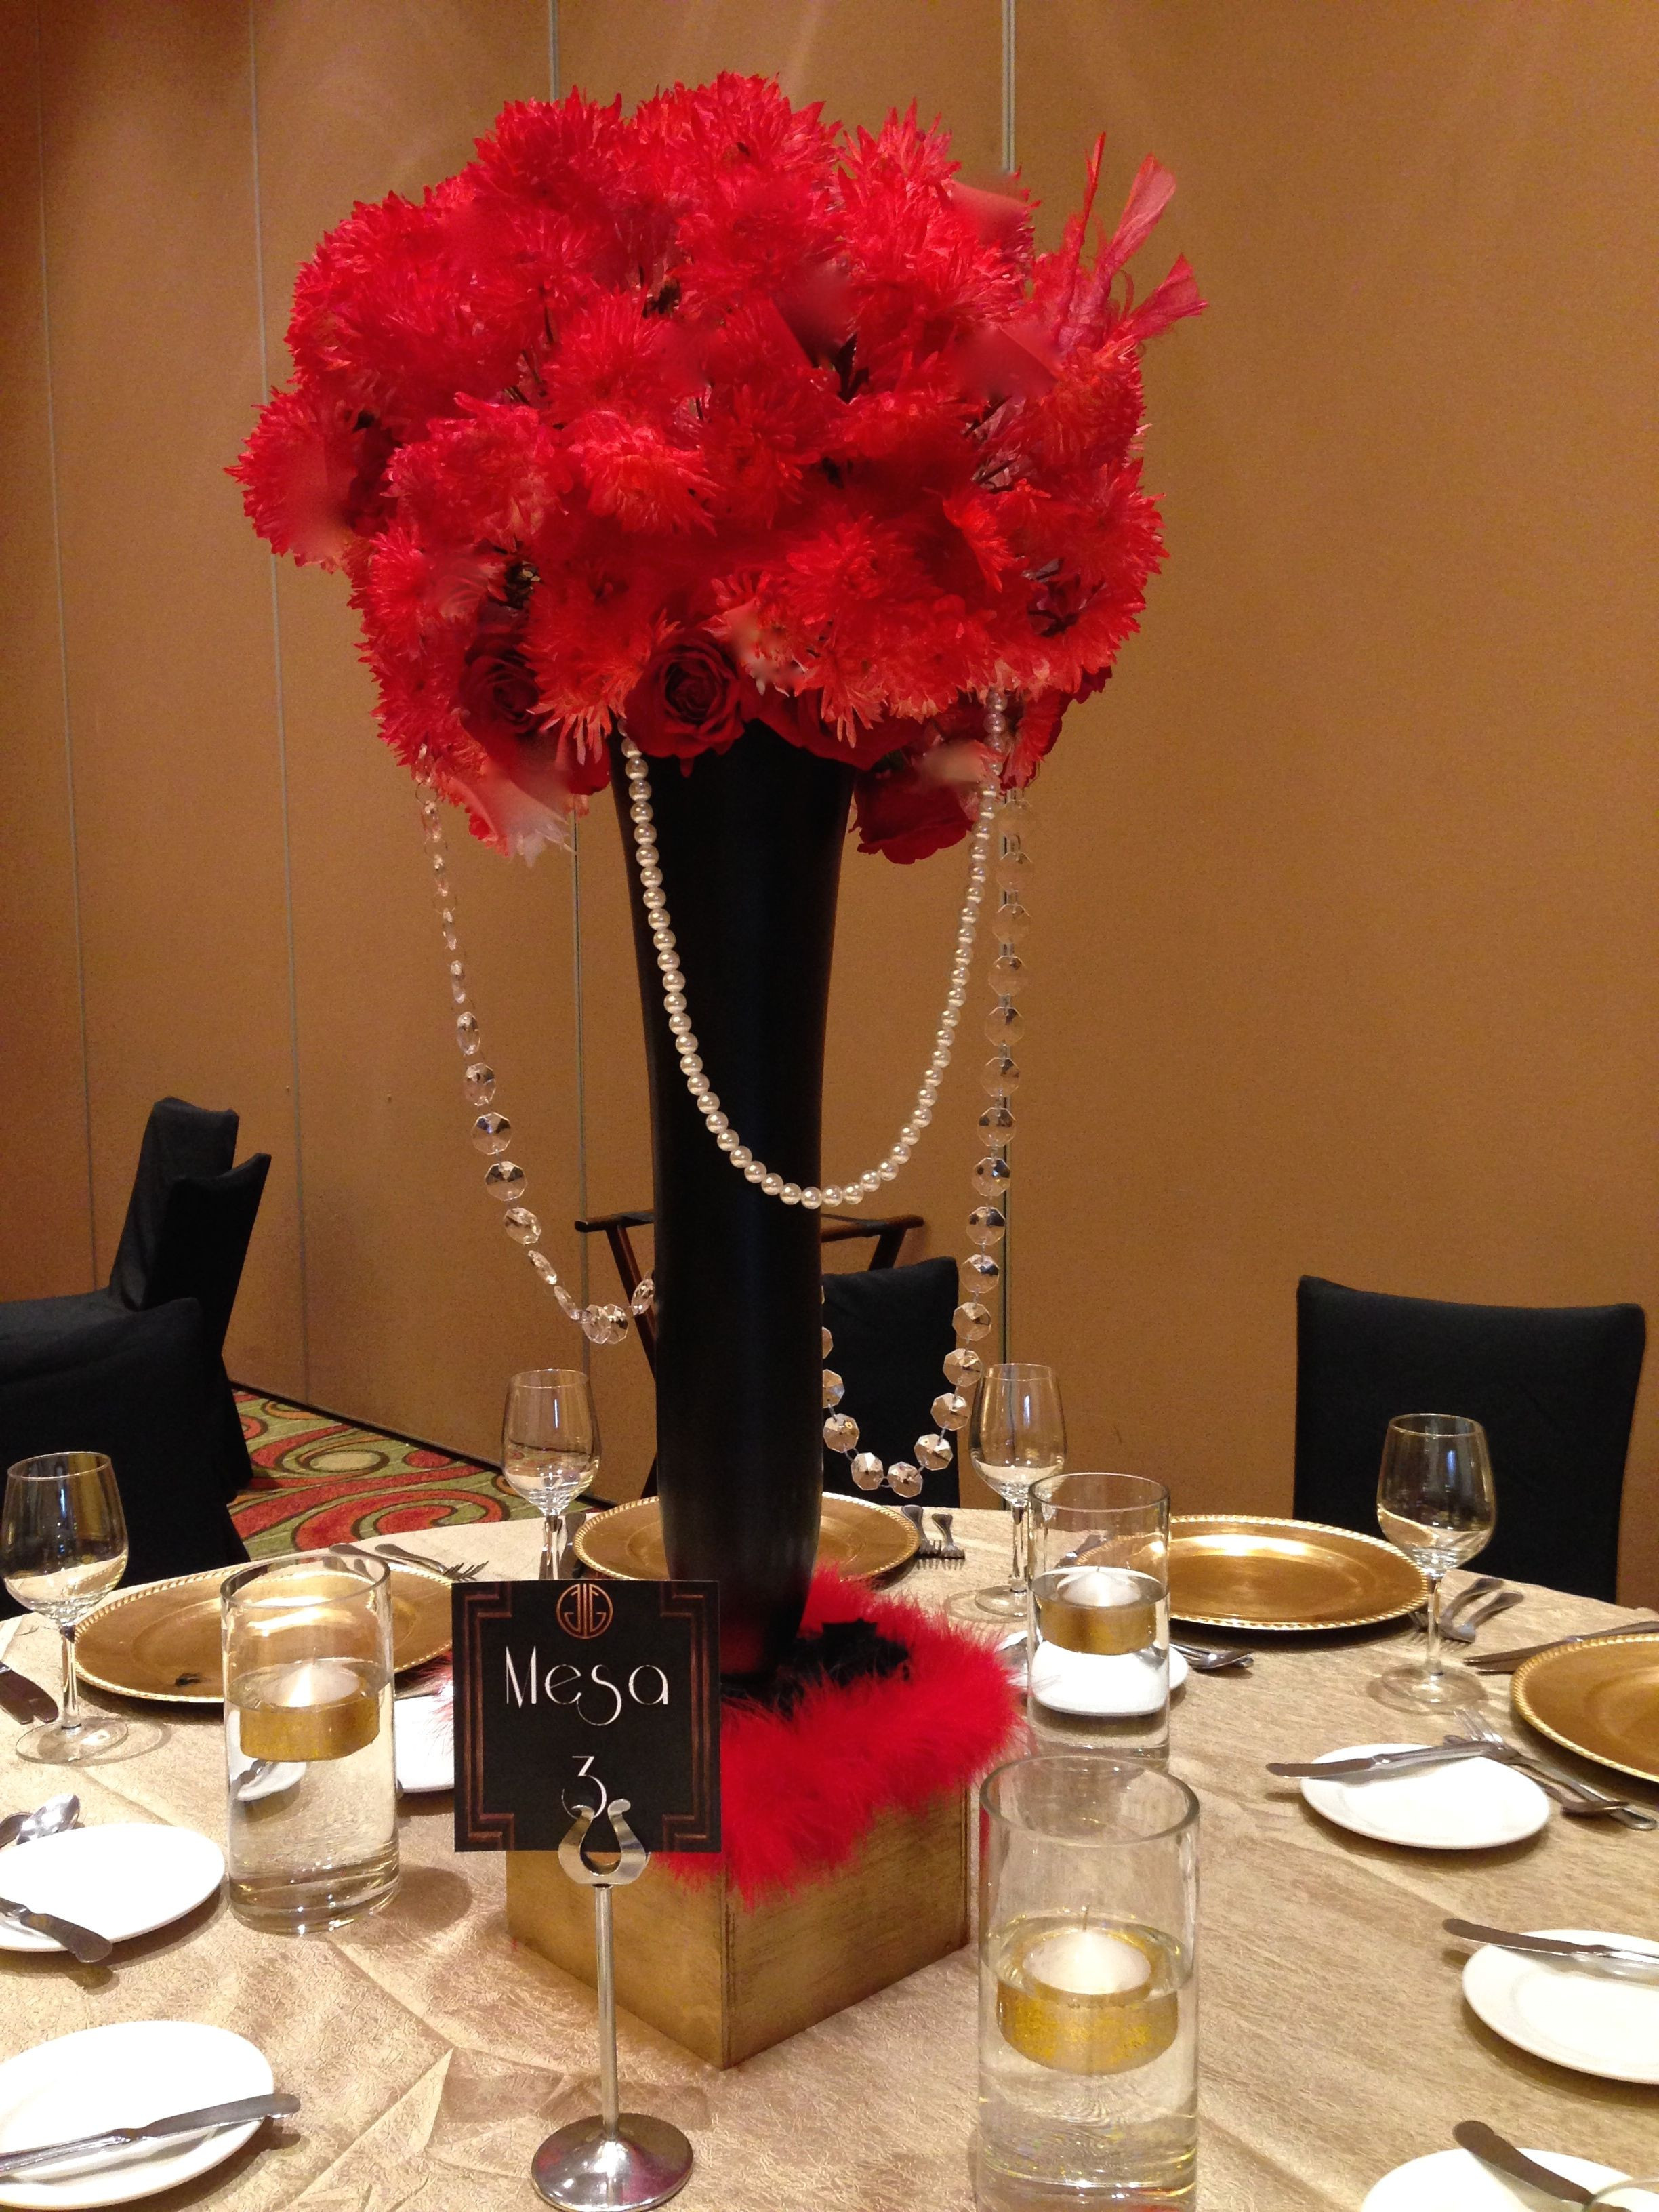 26 Stylish Irish Crystal Vase 2024 free download irish crystal vase of tall black vases pictures il fullxfull h vases black vase white intended for tall black vases image tall centerpiece red roses and black vases great gatsby theme of tal